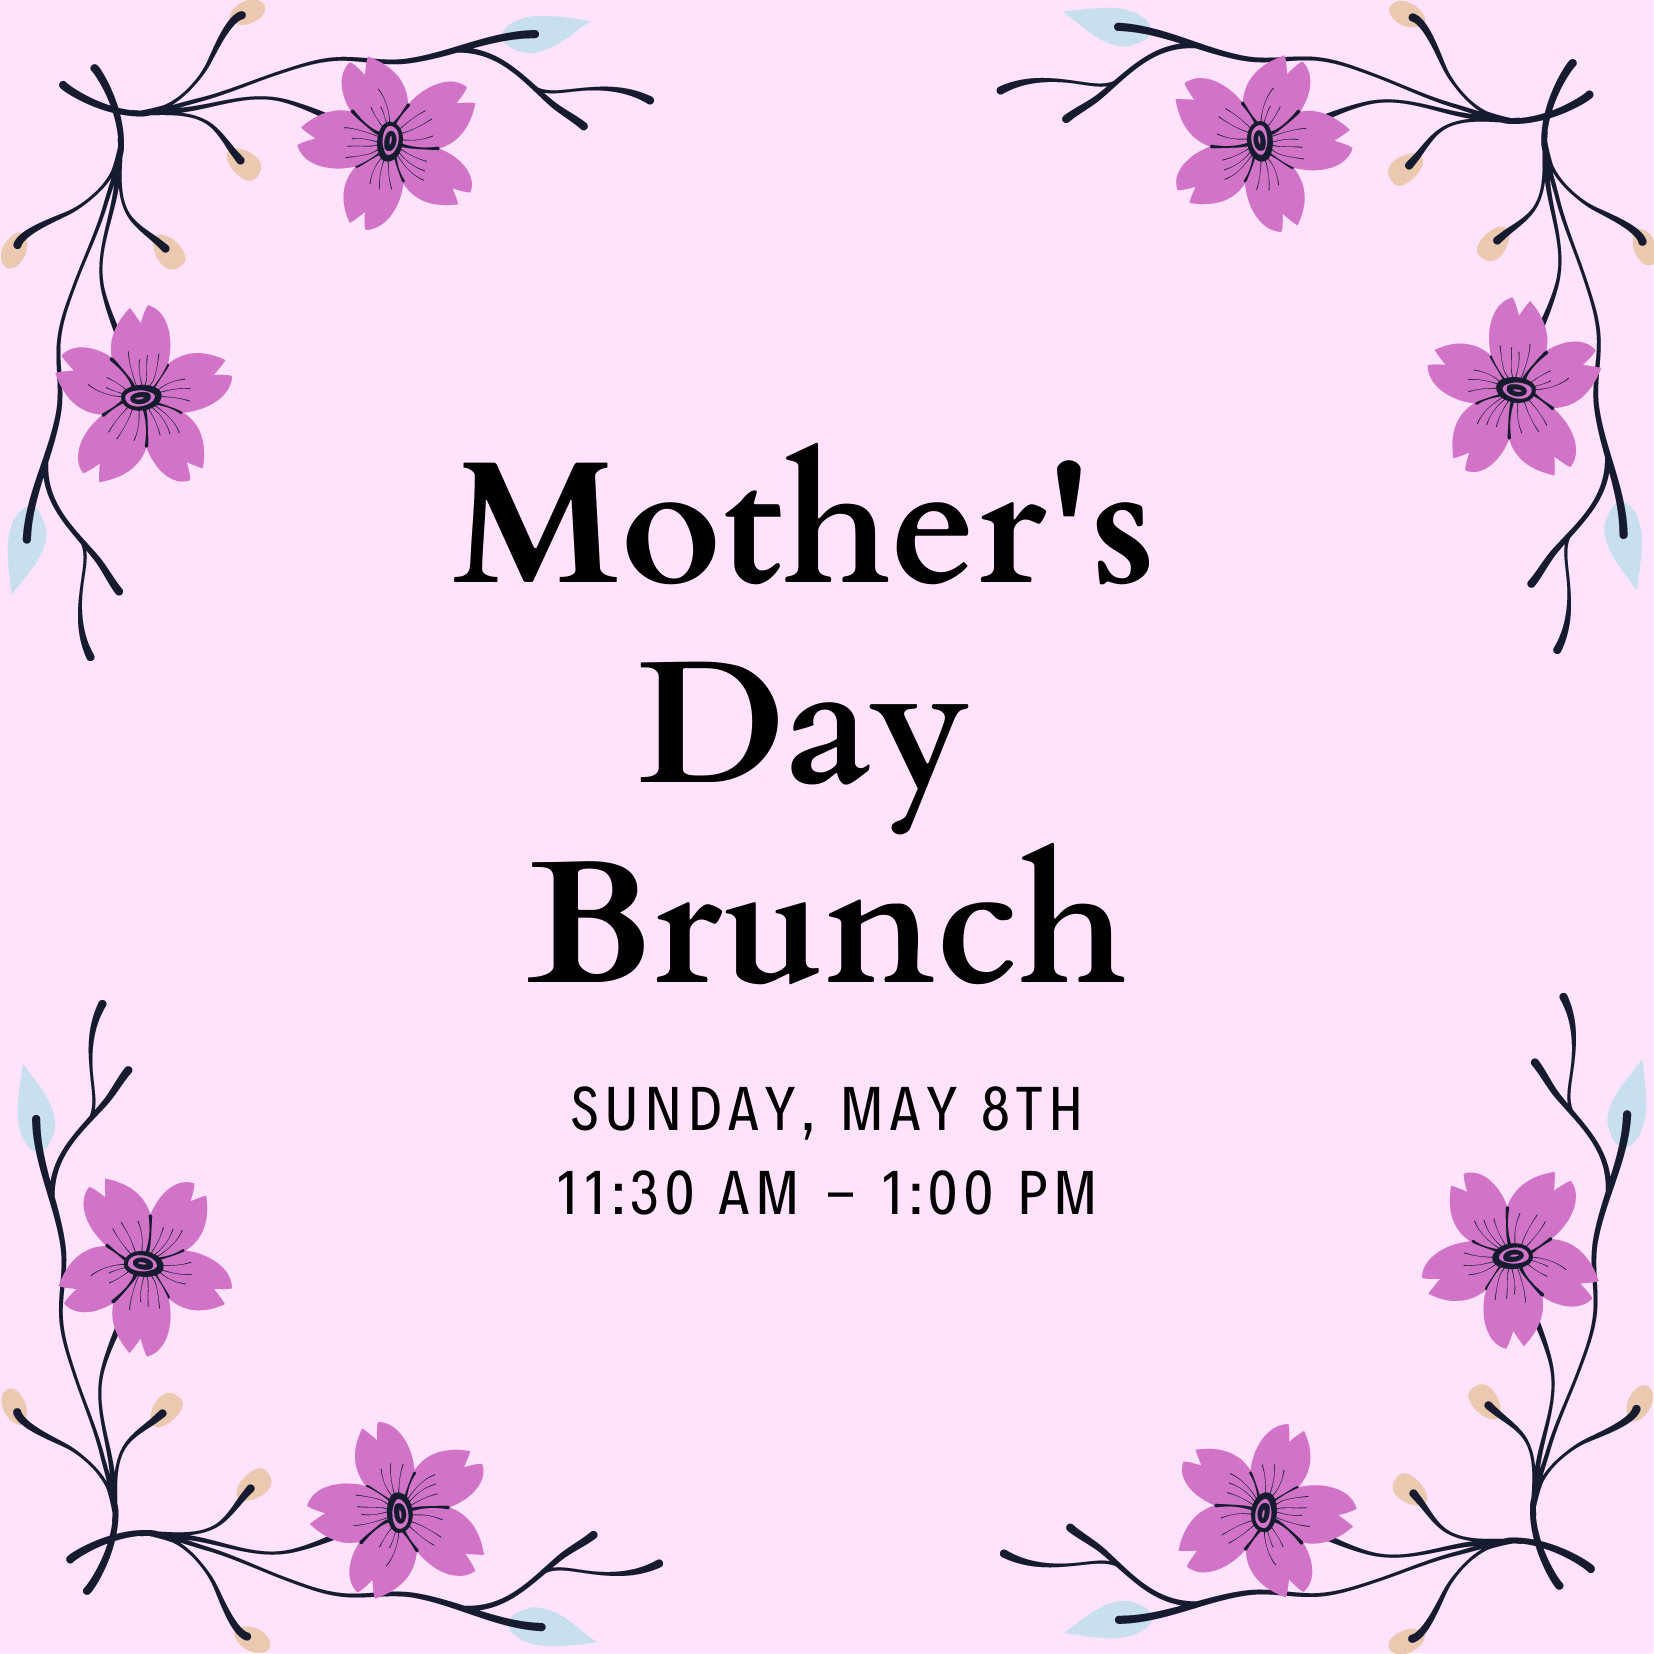 Mother's Day Brunch, May 8th: 11:30-1PM